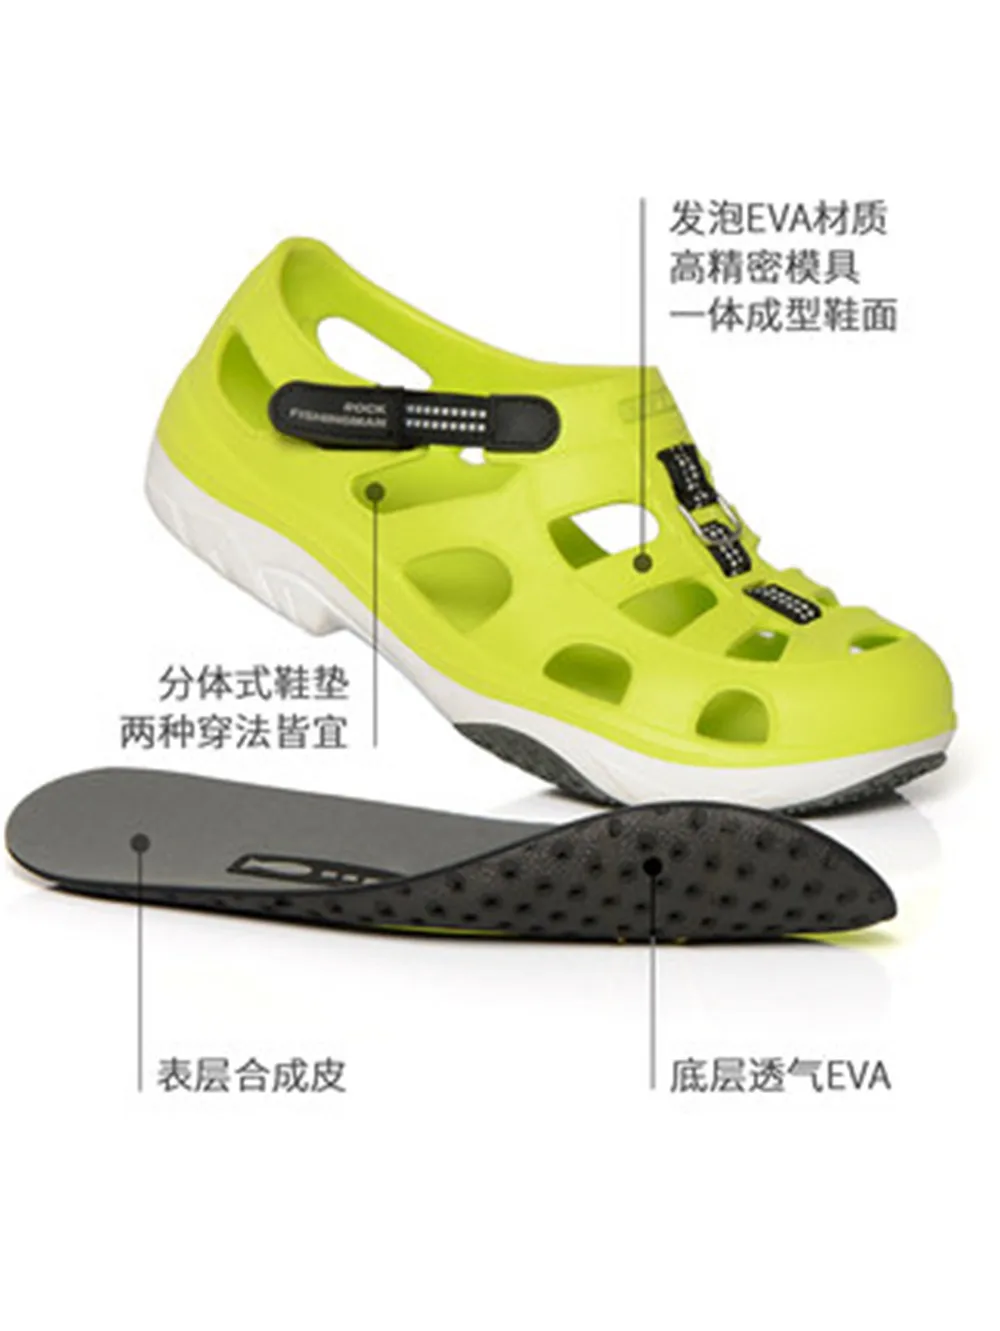 Fly Fishing Wading Shoes Seas Fishing Sandals Upstream Fish Boots Special Outdoor Boat Non-Slip Hole Sandals Summer Men Women Green / 8